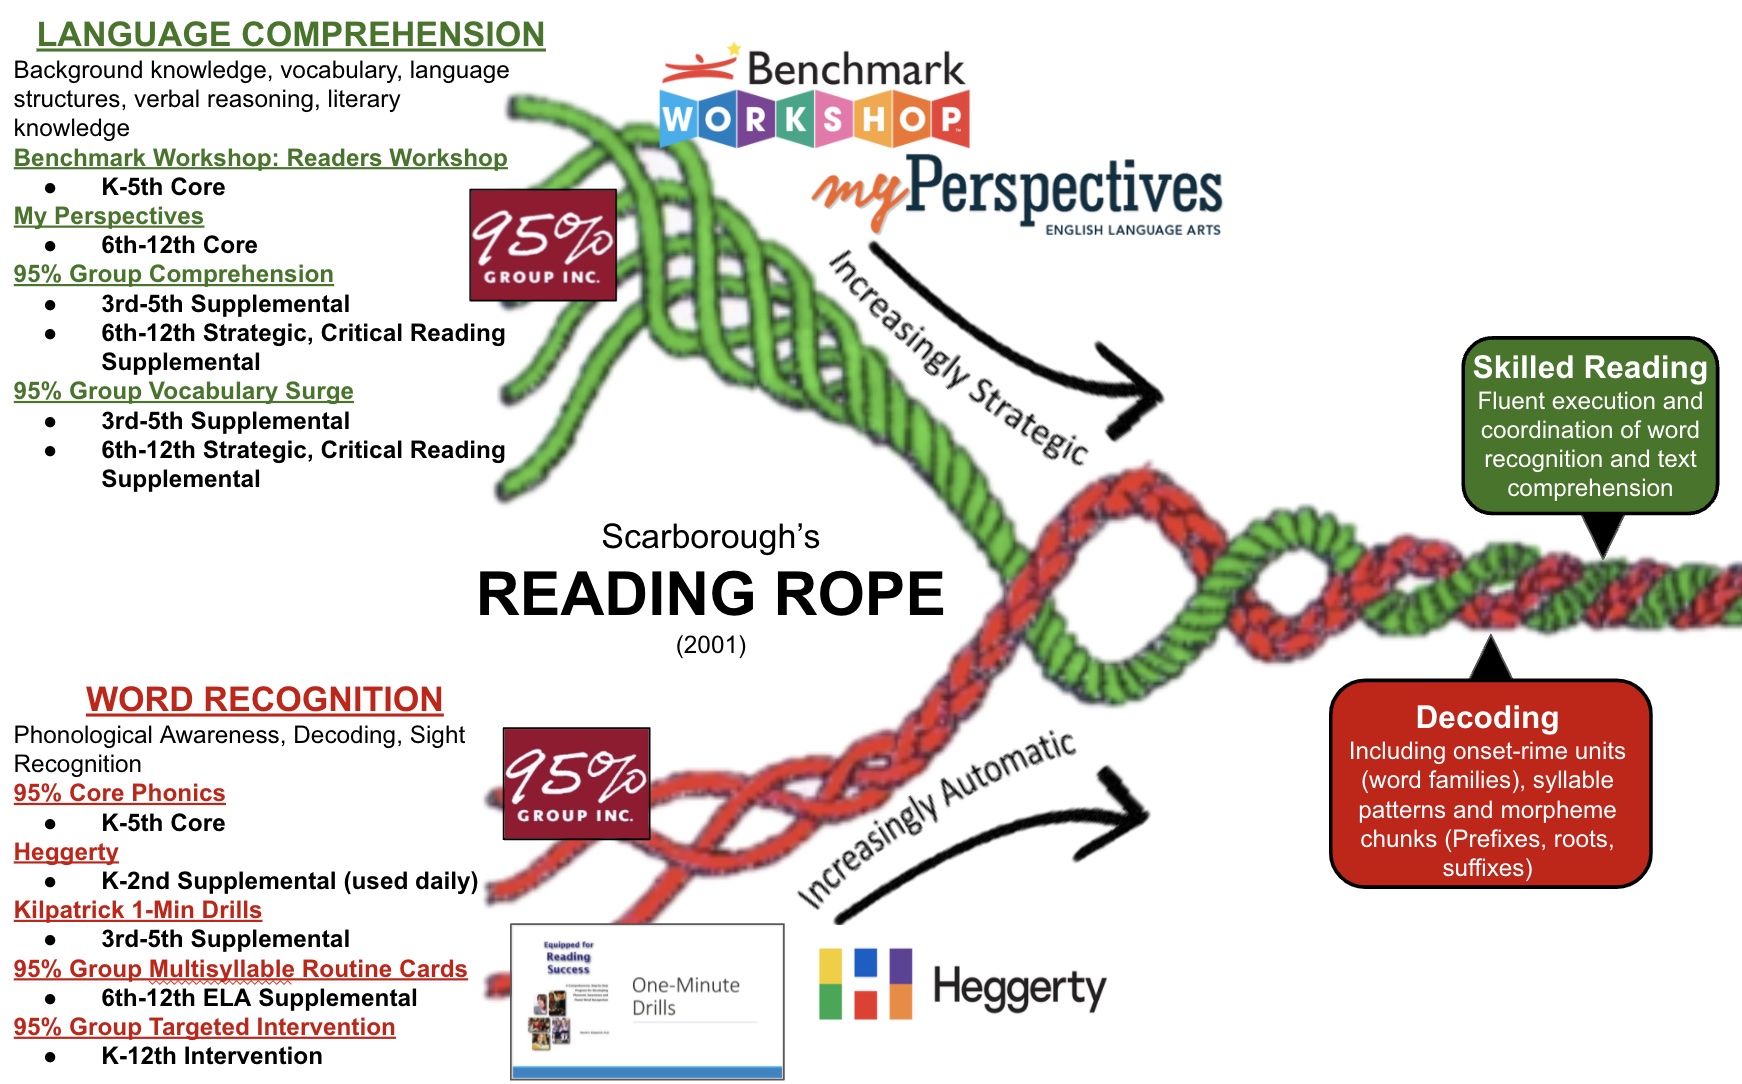 PBSD Reading Rope